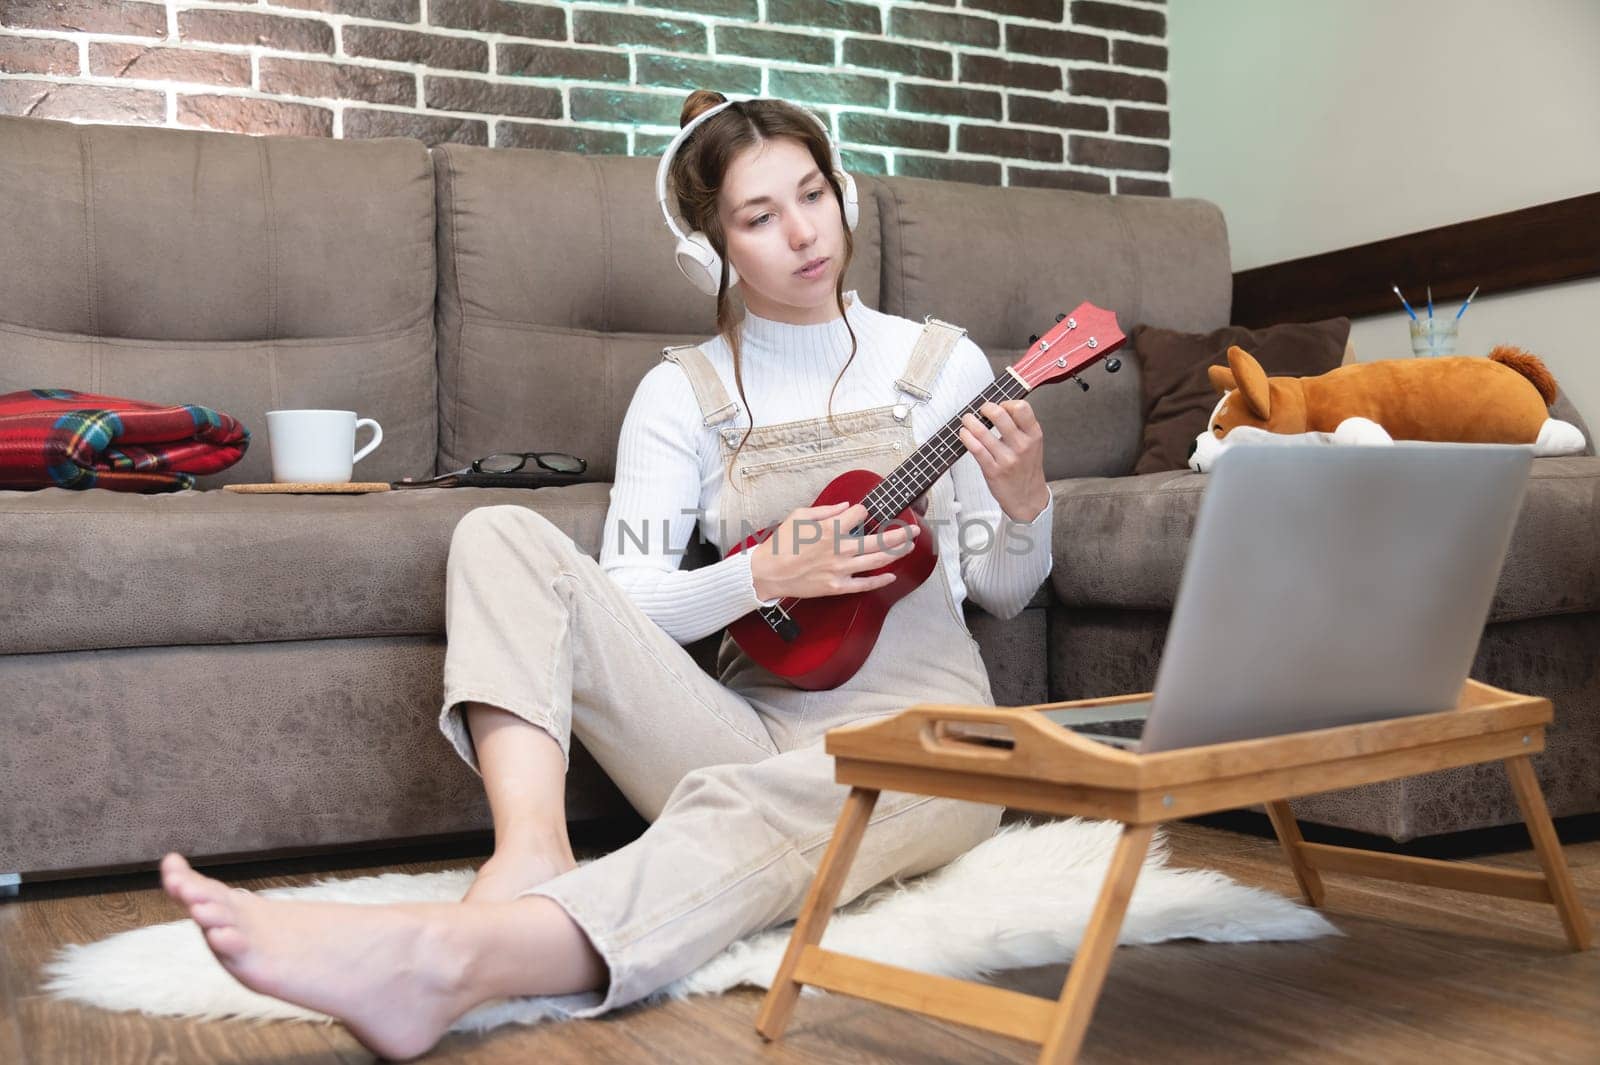 Hobbies and leisure activities during quarantine. Online training, online classes. A young woman watches a video lesson on playing the guitar, she sits on a cozy plaid with a guitar by yanik88